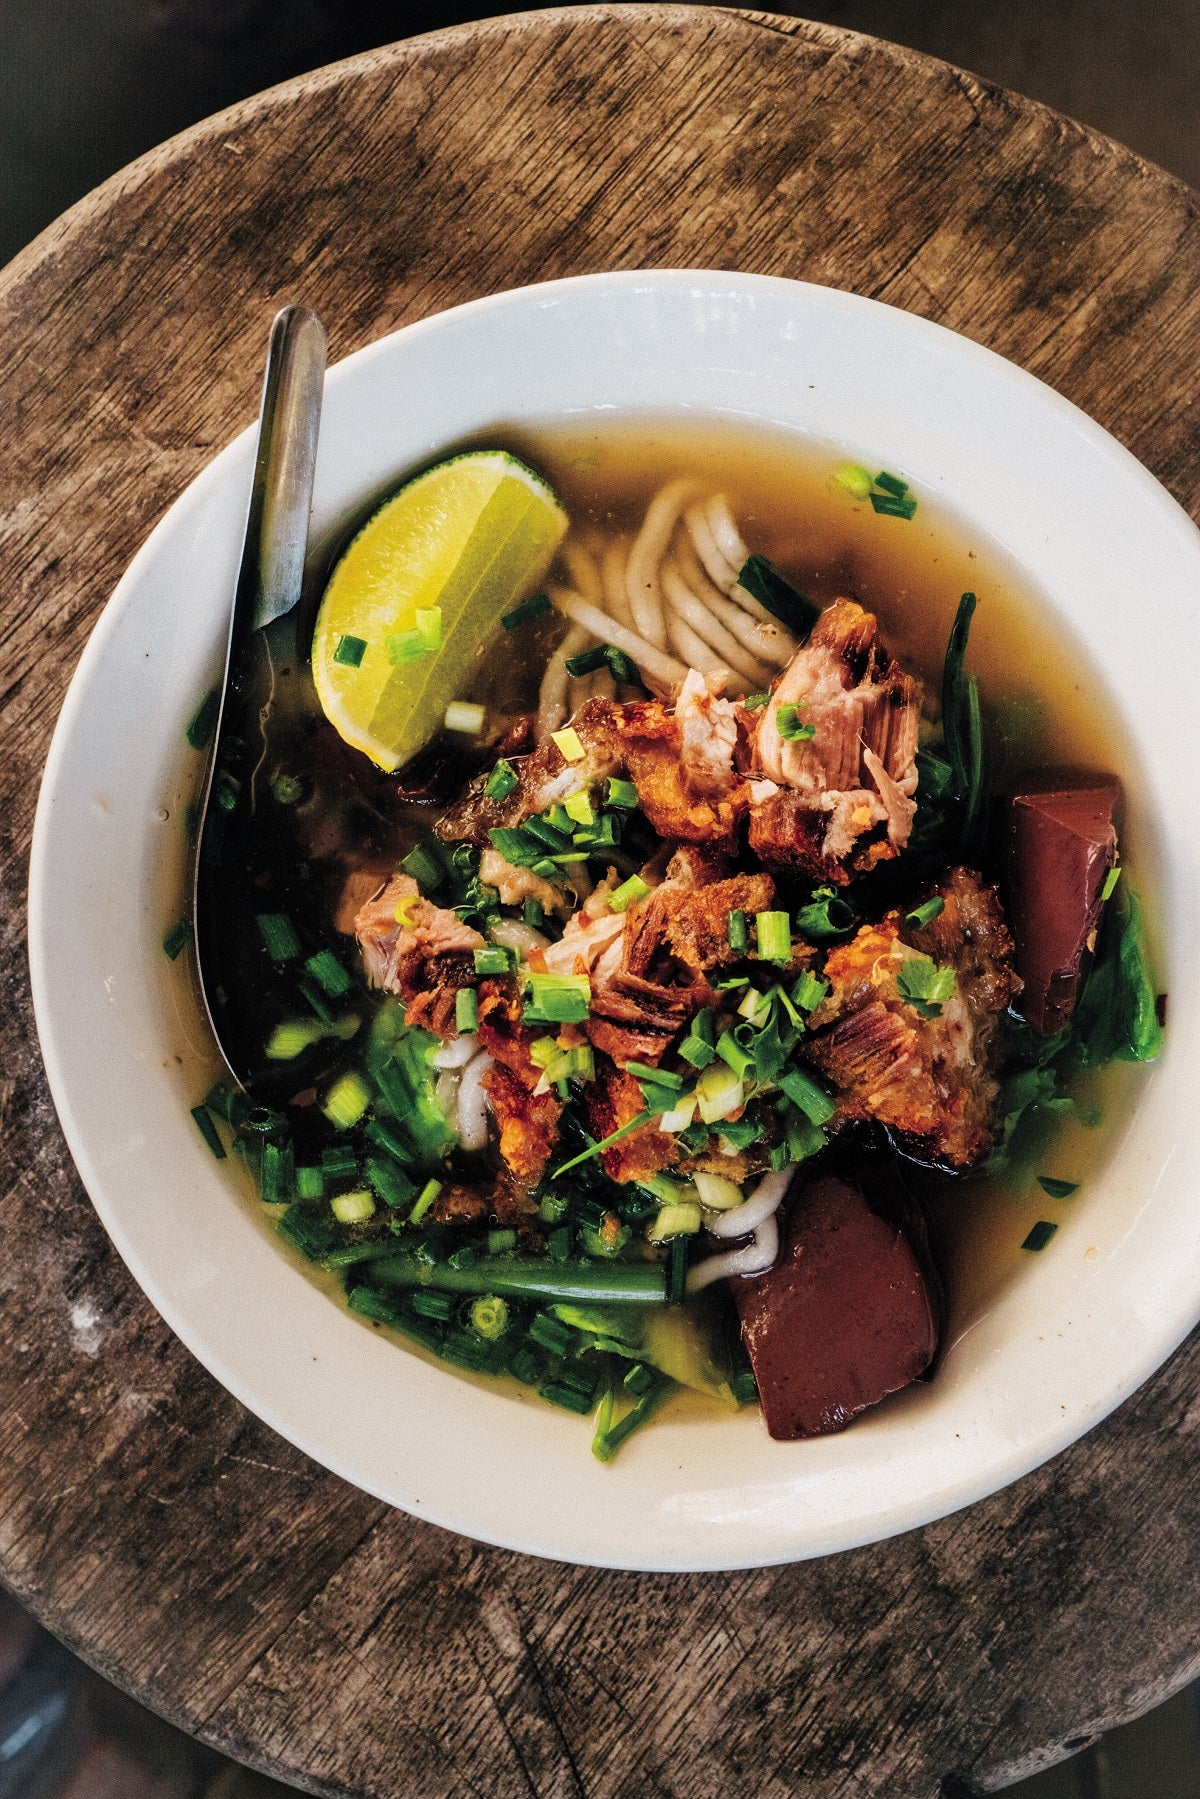 Hawker Fare: Stories & Recipes from a Refugee Chef's Isan Thai & Lao Roots